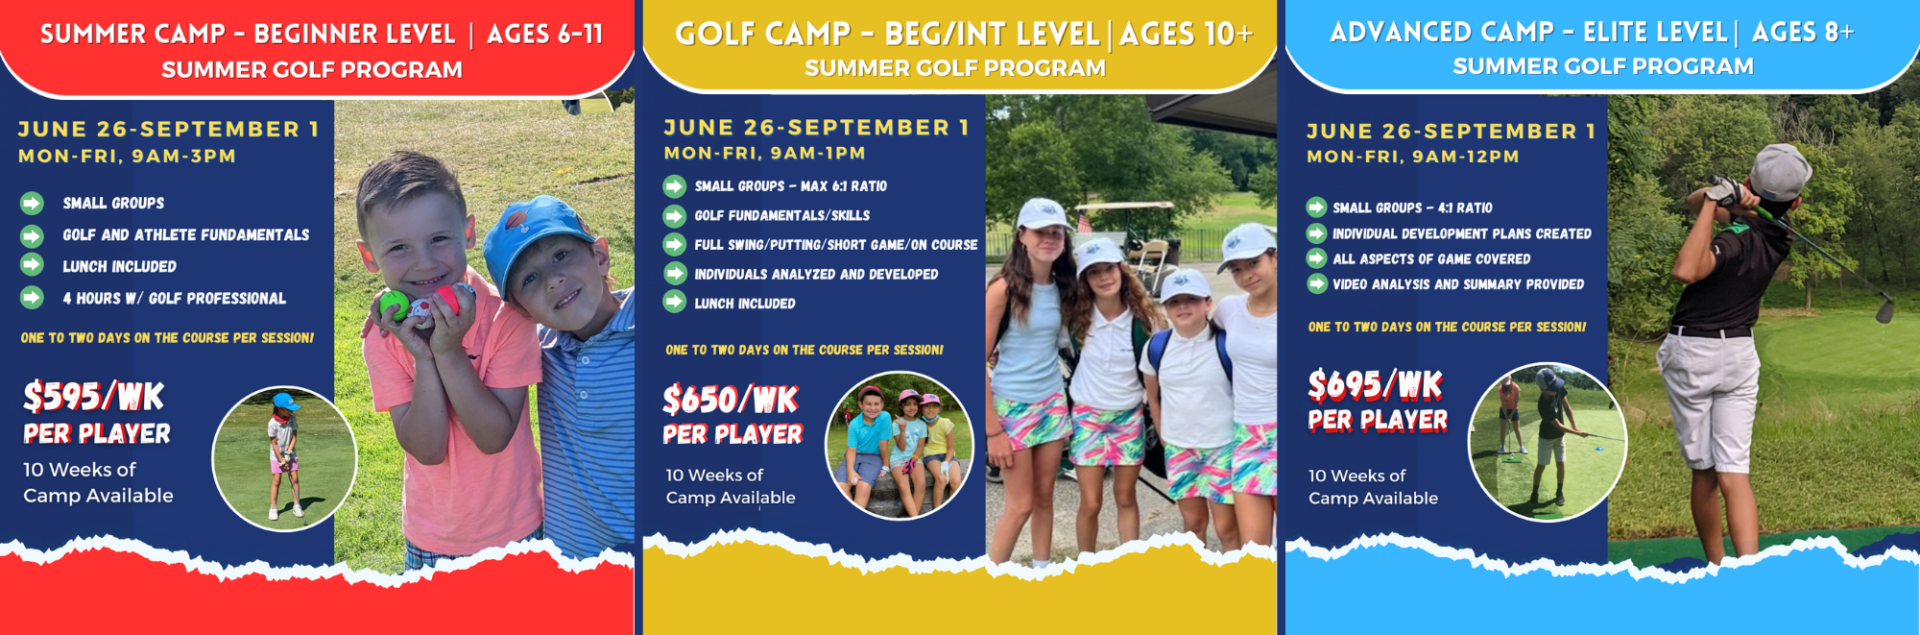 Copy of Copy of GOLF SUMMER CAMPS For Website